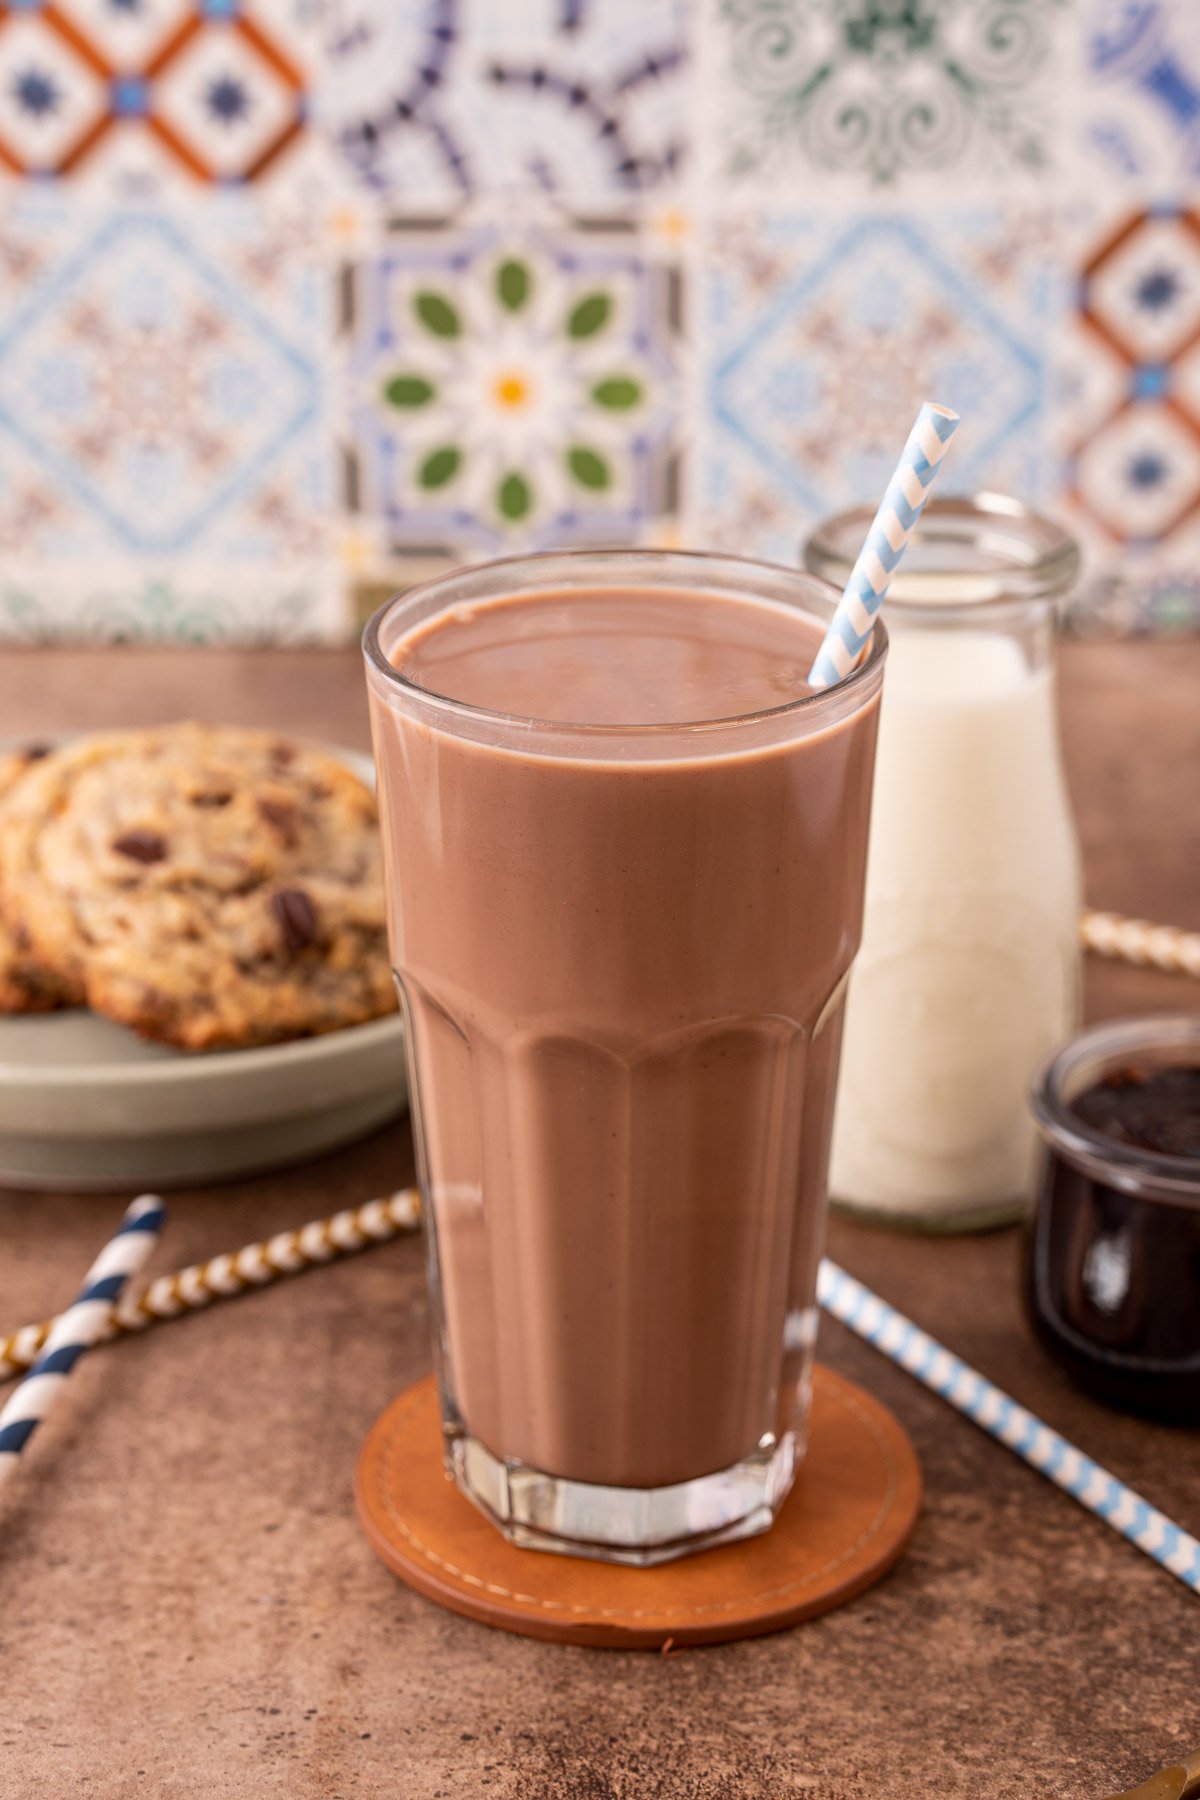 This recipe for Chocolate Milk for One makes one cup of amazing